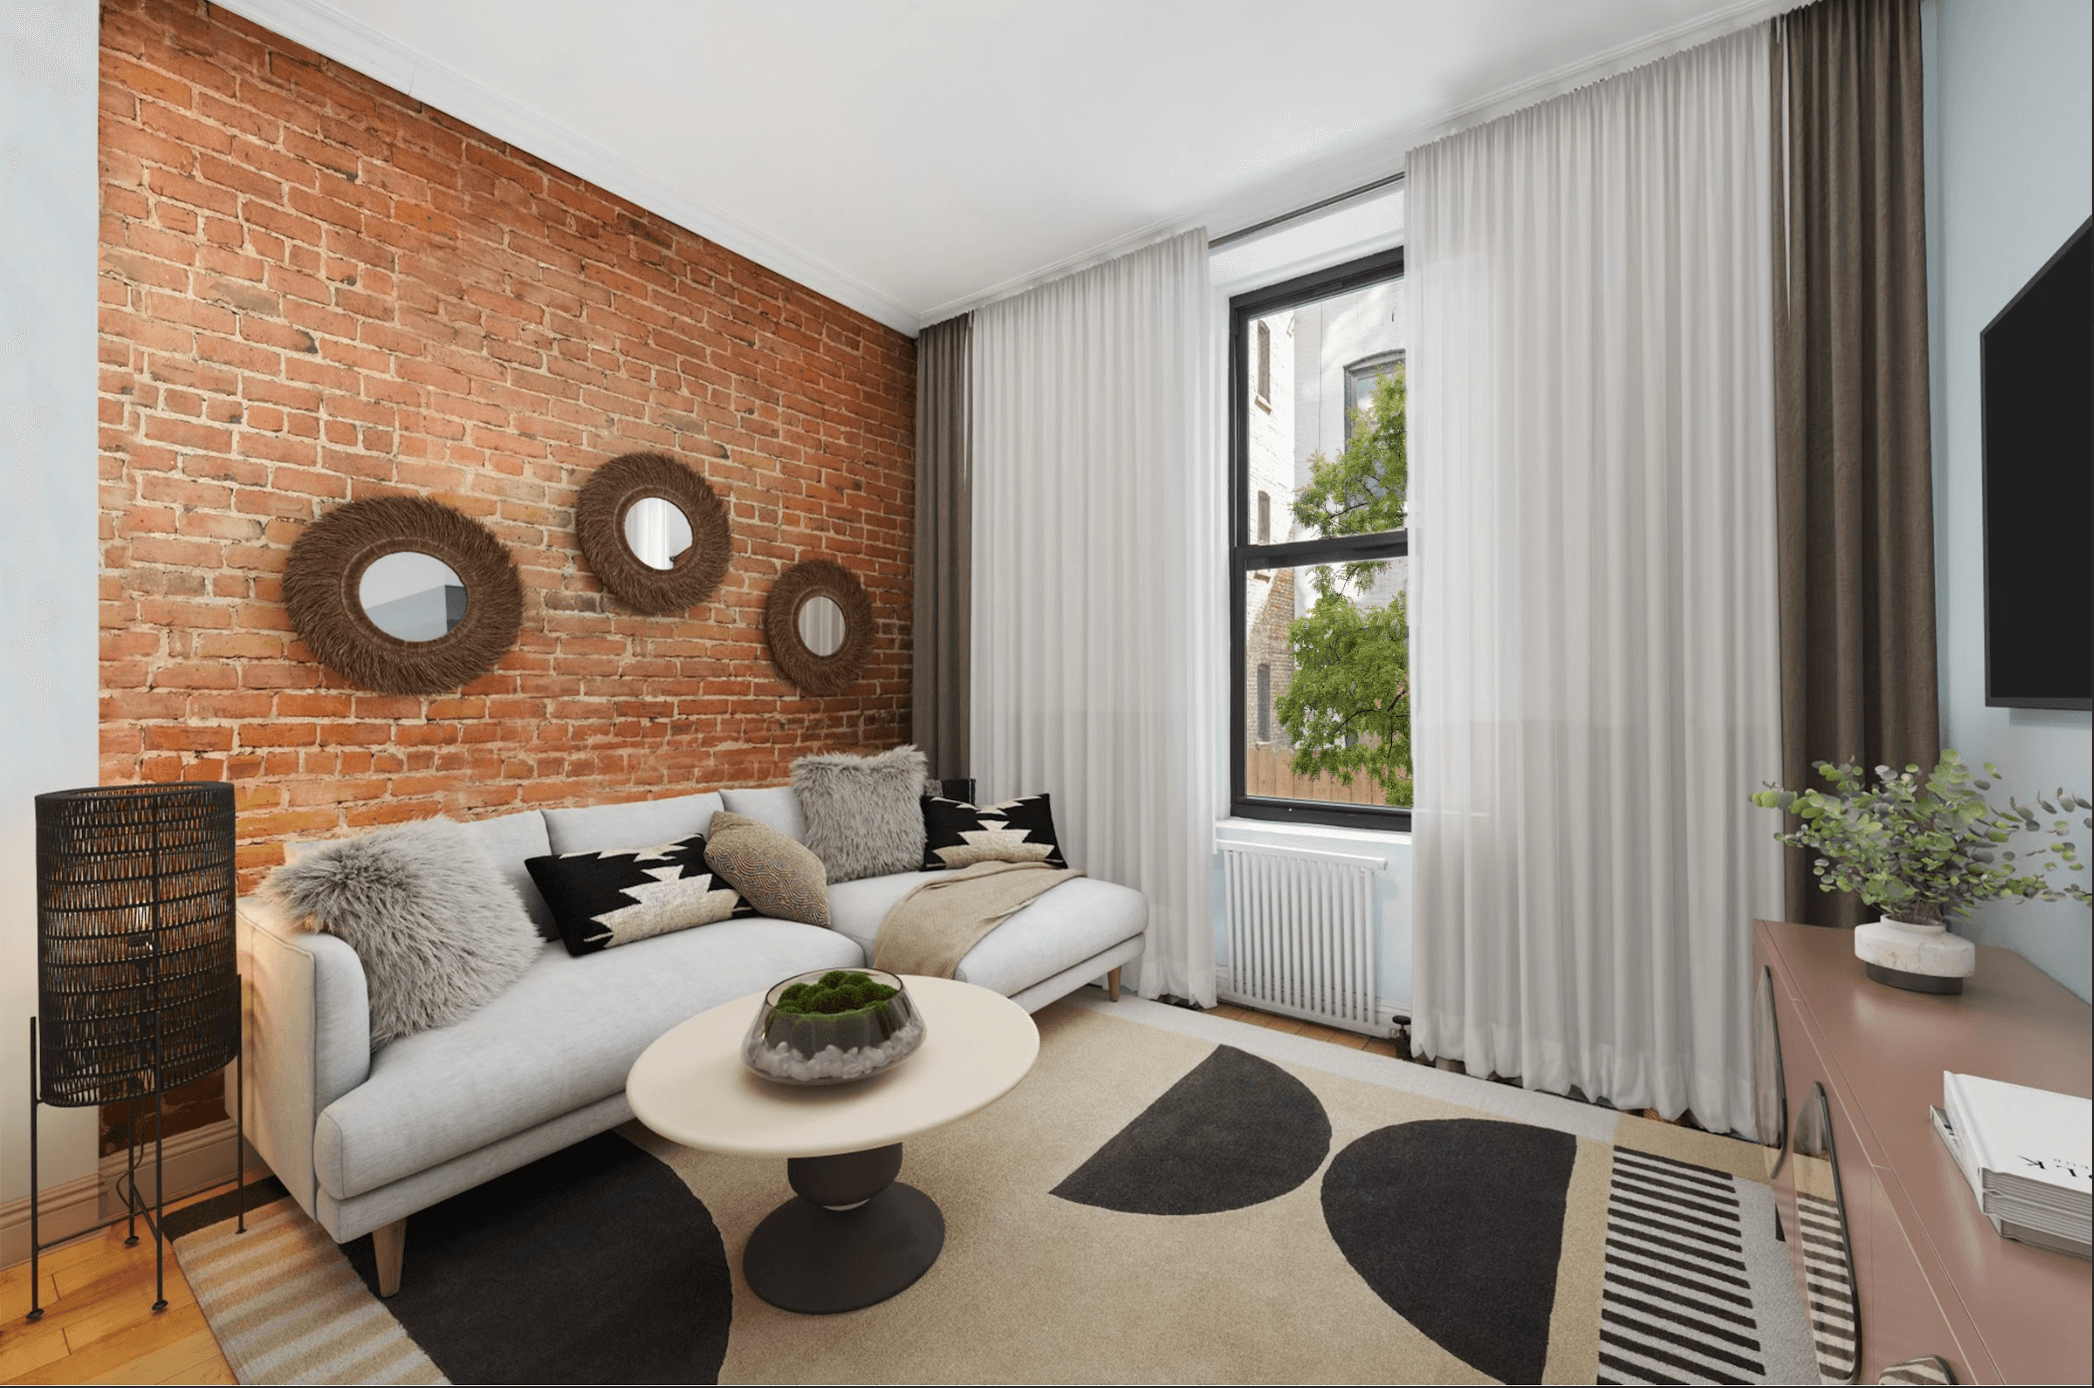 beautifully renovated one bed-room sanctuary in the heart of New York City’s sought after West Village neighborhood. Nestled on the best tree-lined, brownstone block, steps from wonderful restaurants and elegant shops.